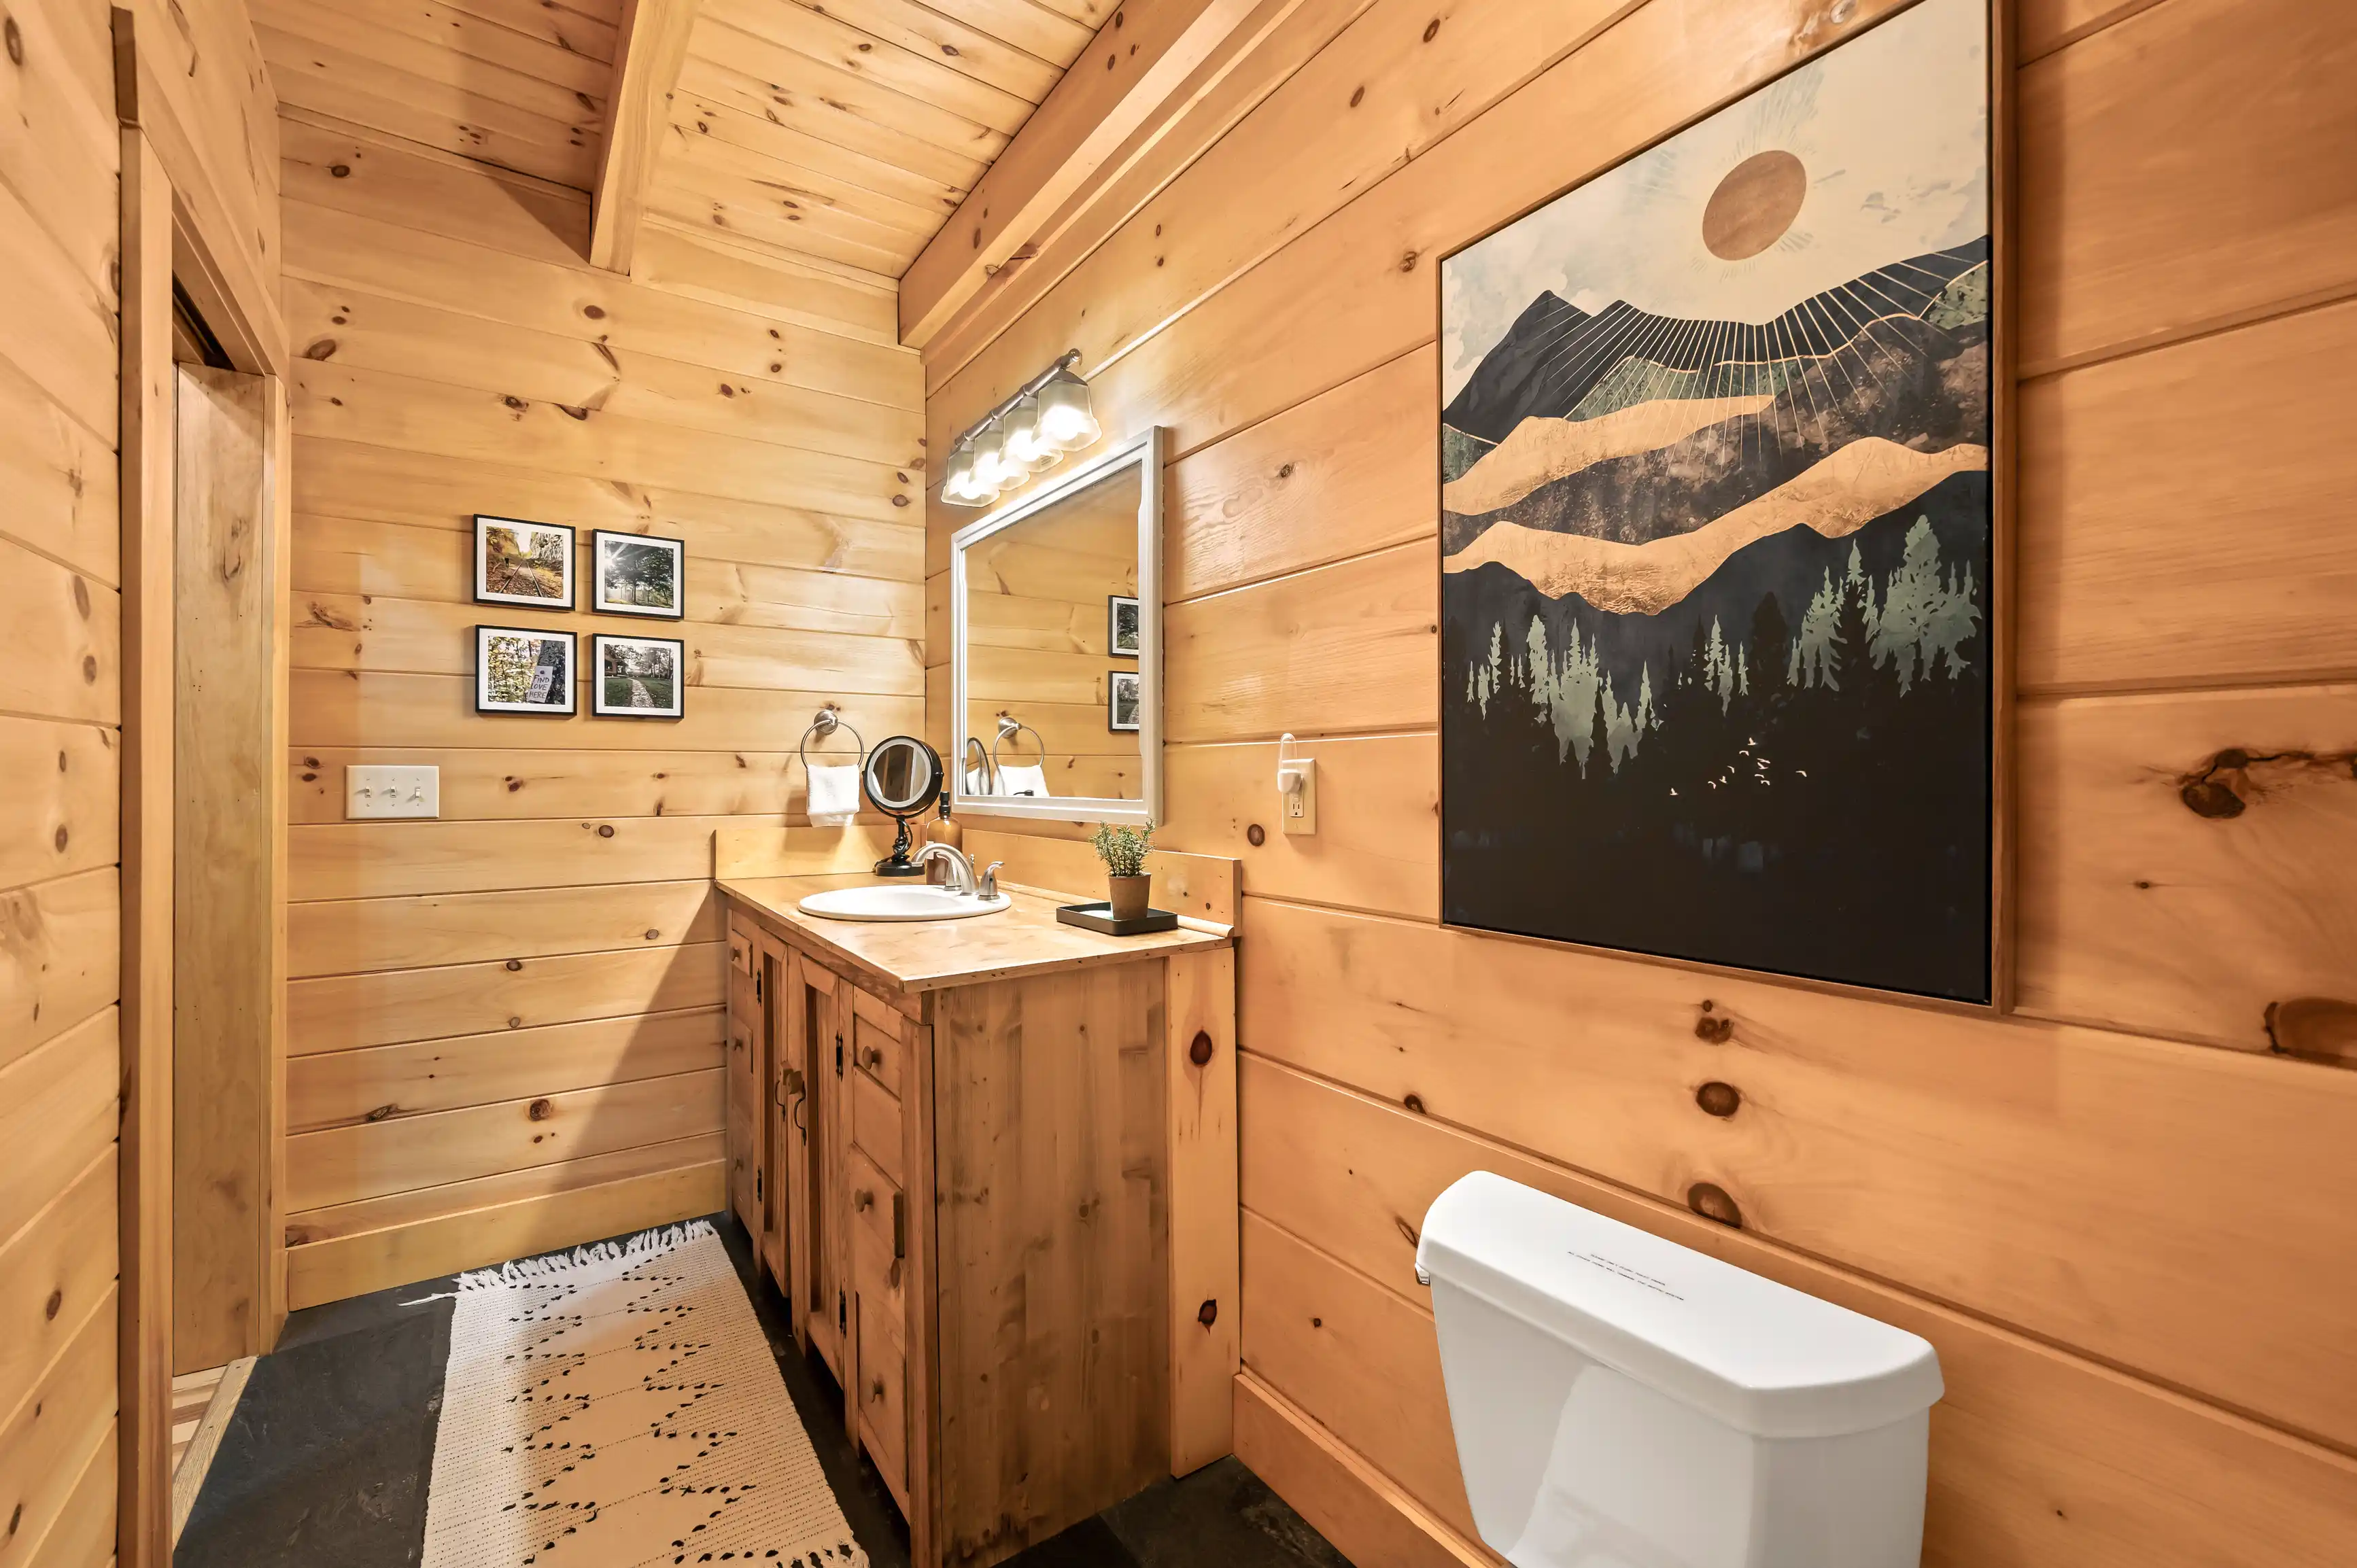 Rustic bathroom interior with wooden walls and floors, a wooden vanity with a basin, a mirror, a toilet, and decorative art.